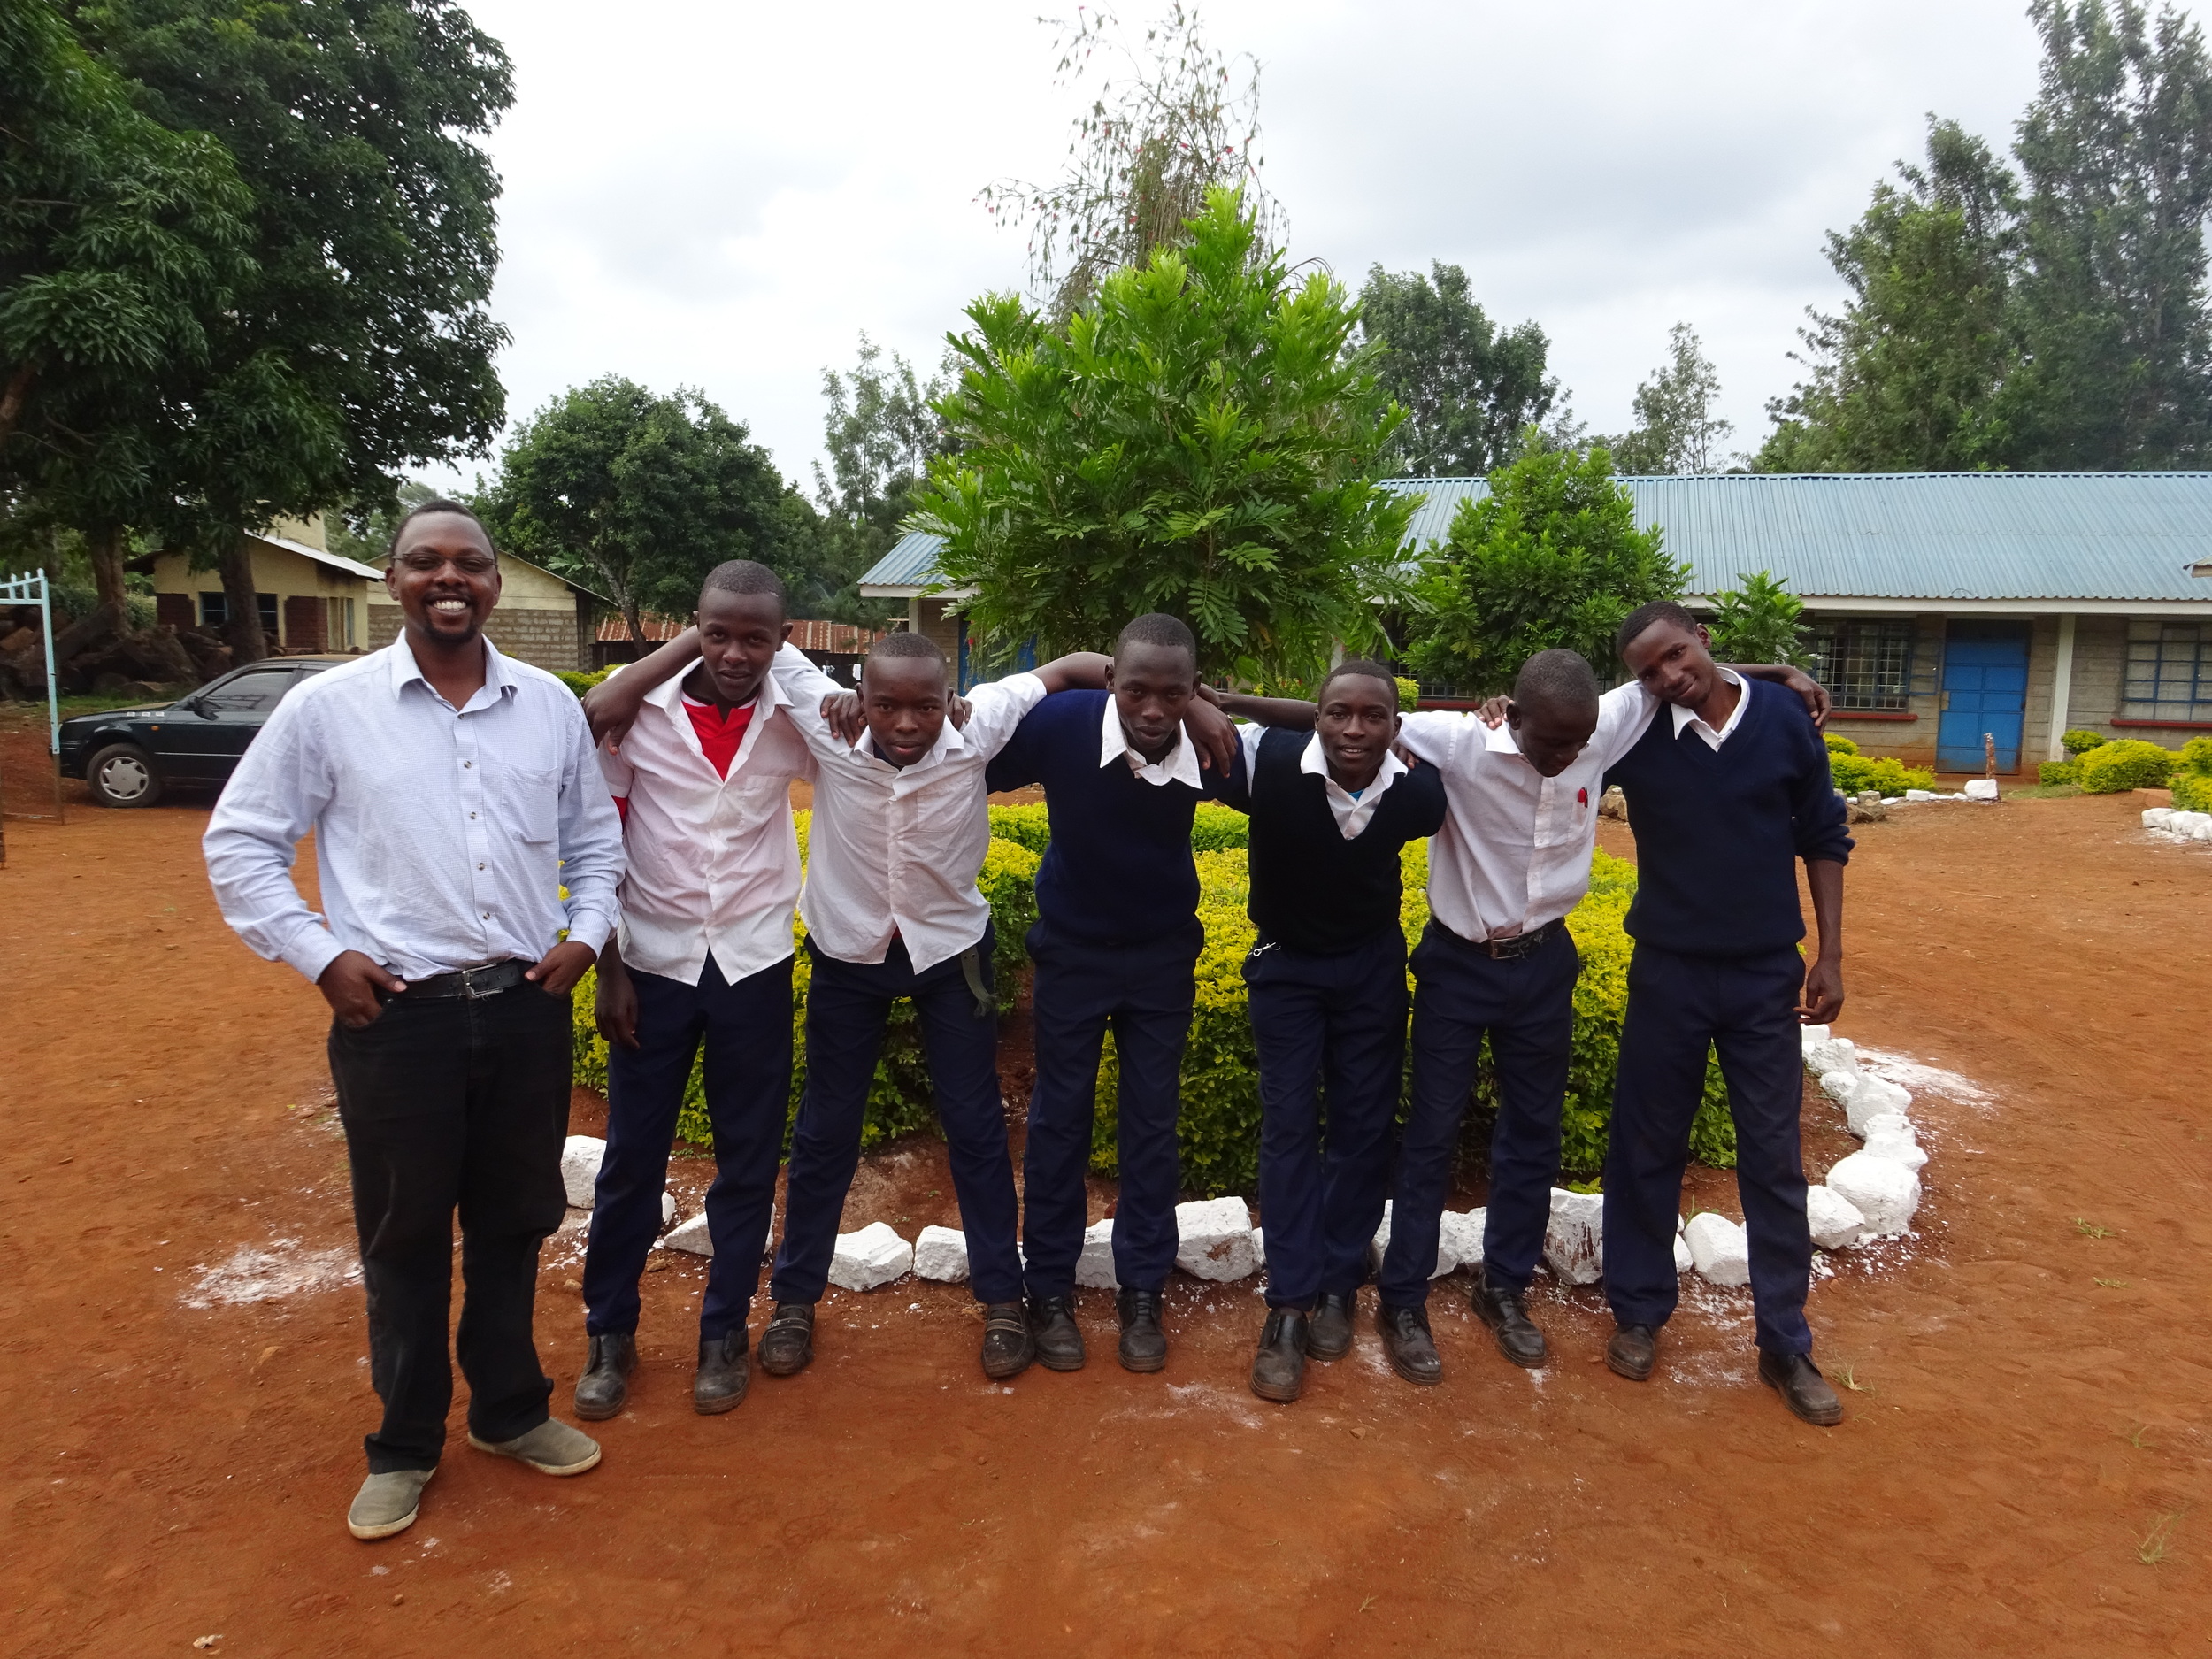 Chairman of Moving Mountains Kenya, Gilbert Njeru with six students from the polytechnic college in Embu